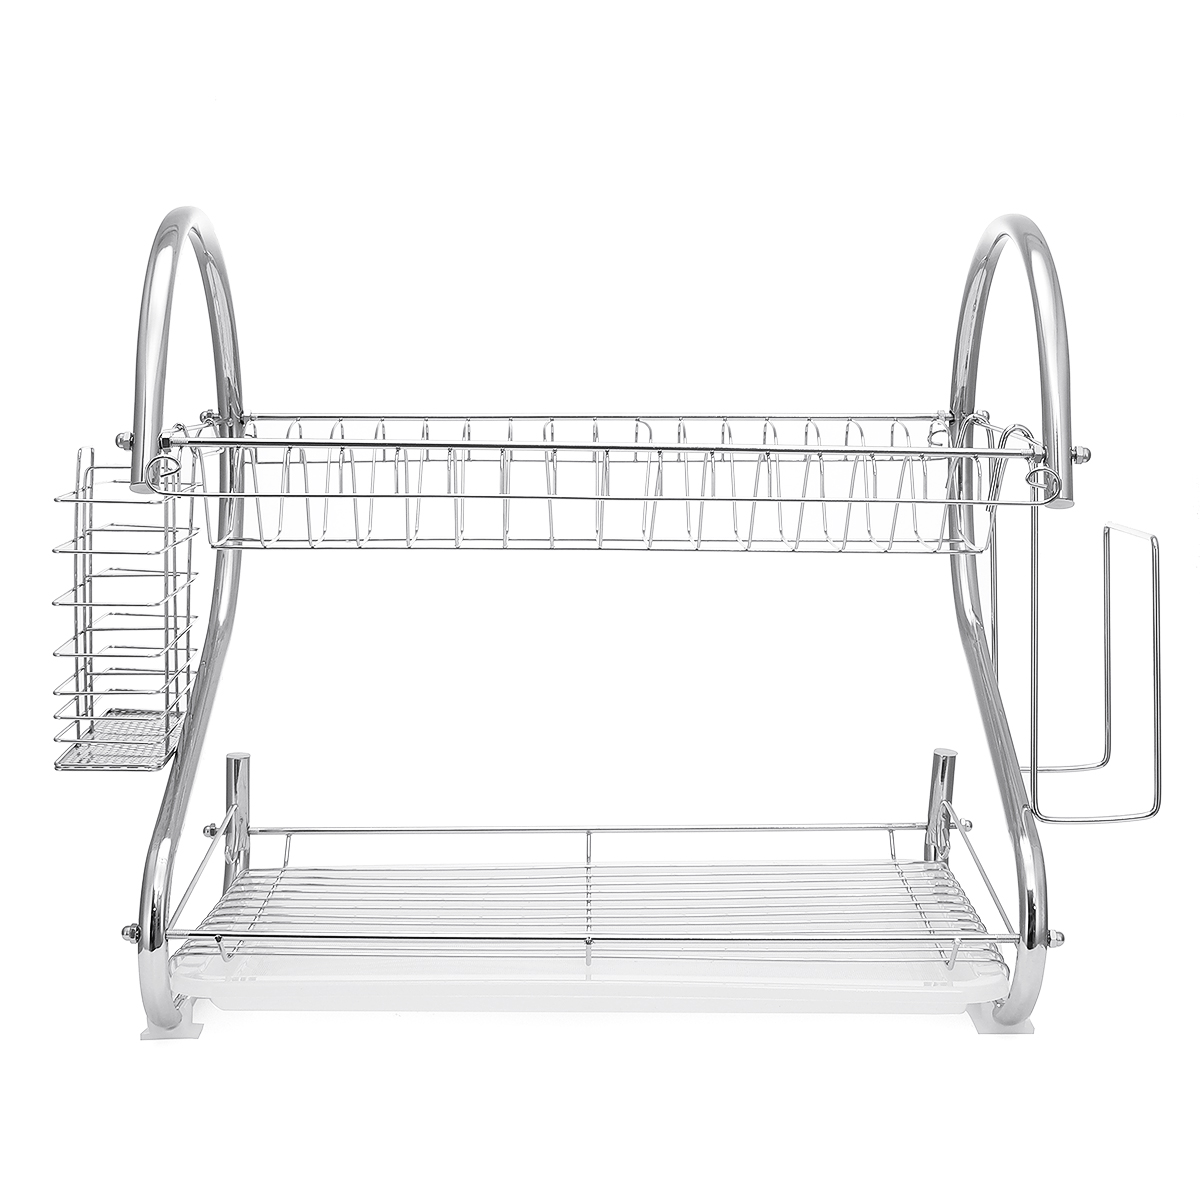 Dish-Drying-Rack-2-Tier-Dish-Rack-with-Utensil-Holder-Cup-Holder-and-Dish-Drainer-for-Kitchen-Counte-1665917-11